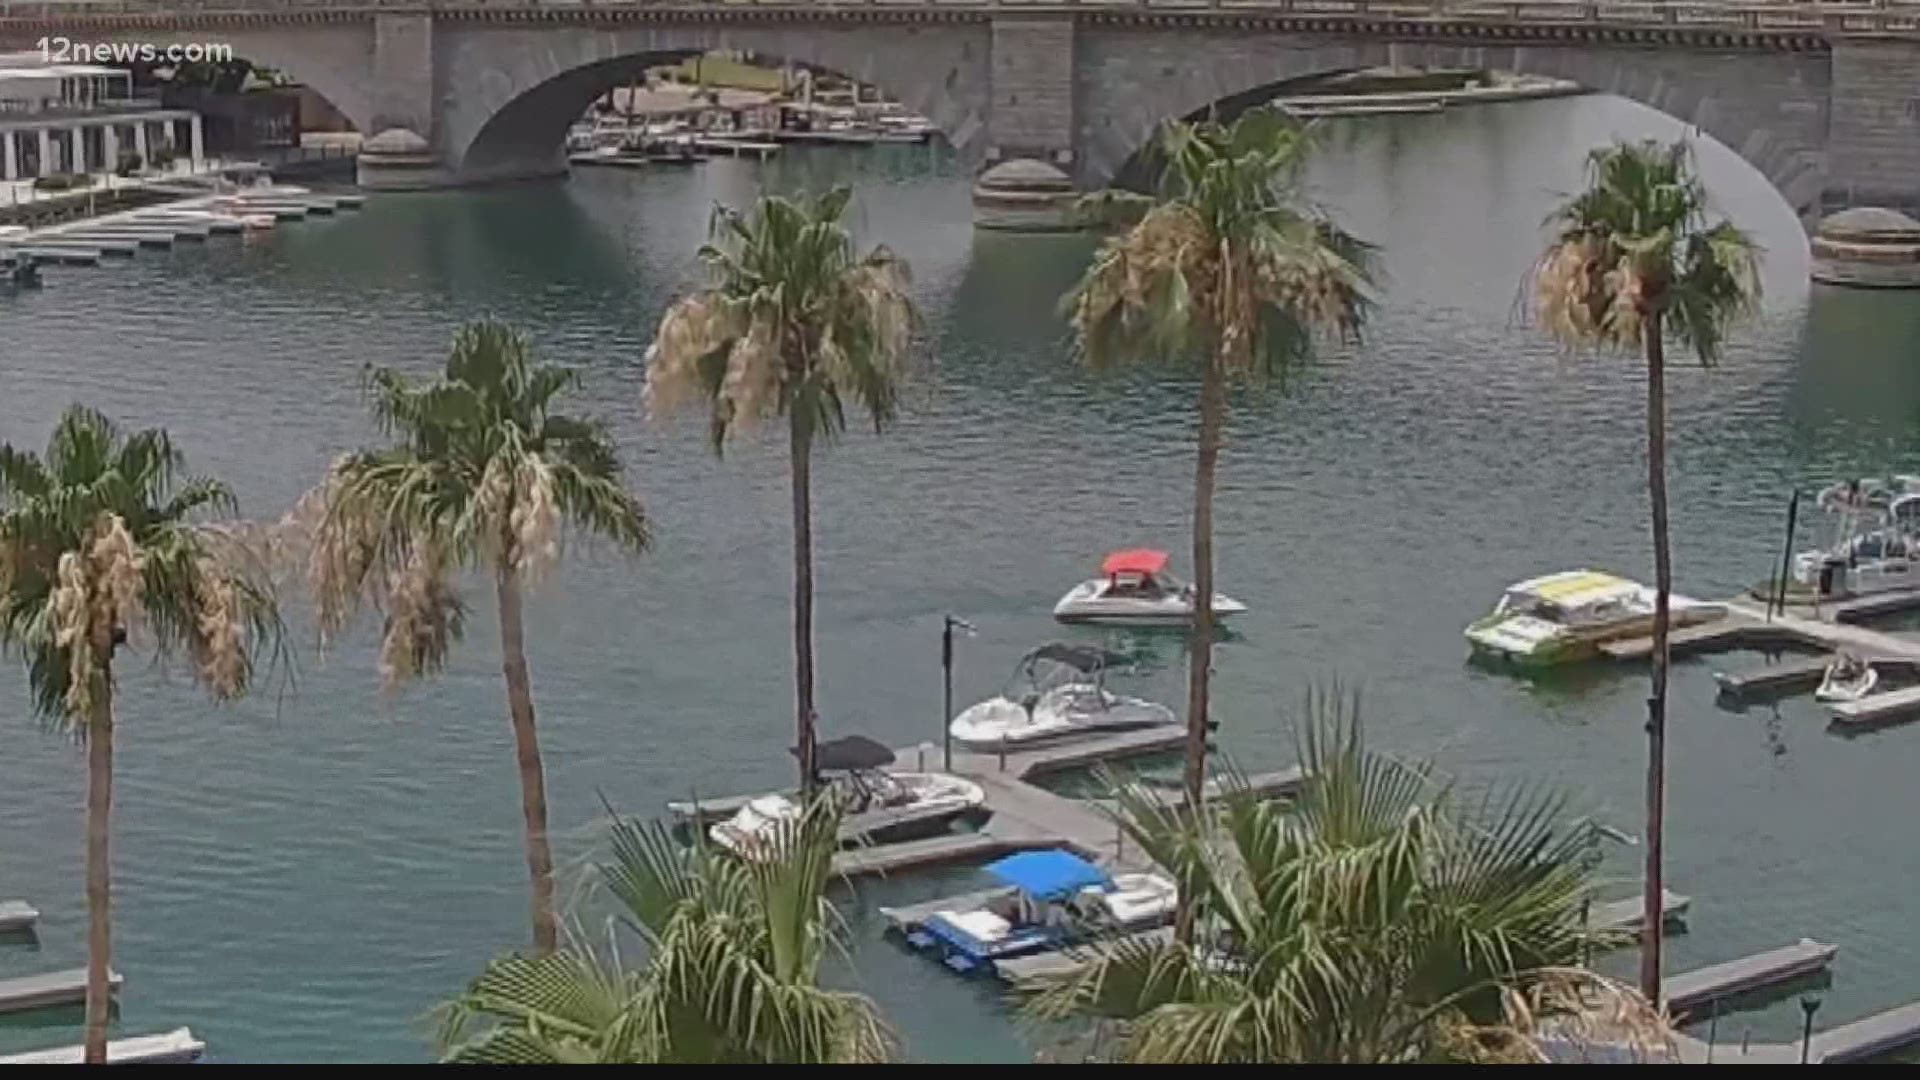 Arizona is experiencing an extreme heatwave and the hottest spot in the state is Lake Havasu City. Temperatures there are nearing 120 degrees Fahrenheit.